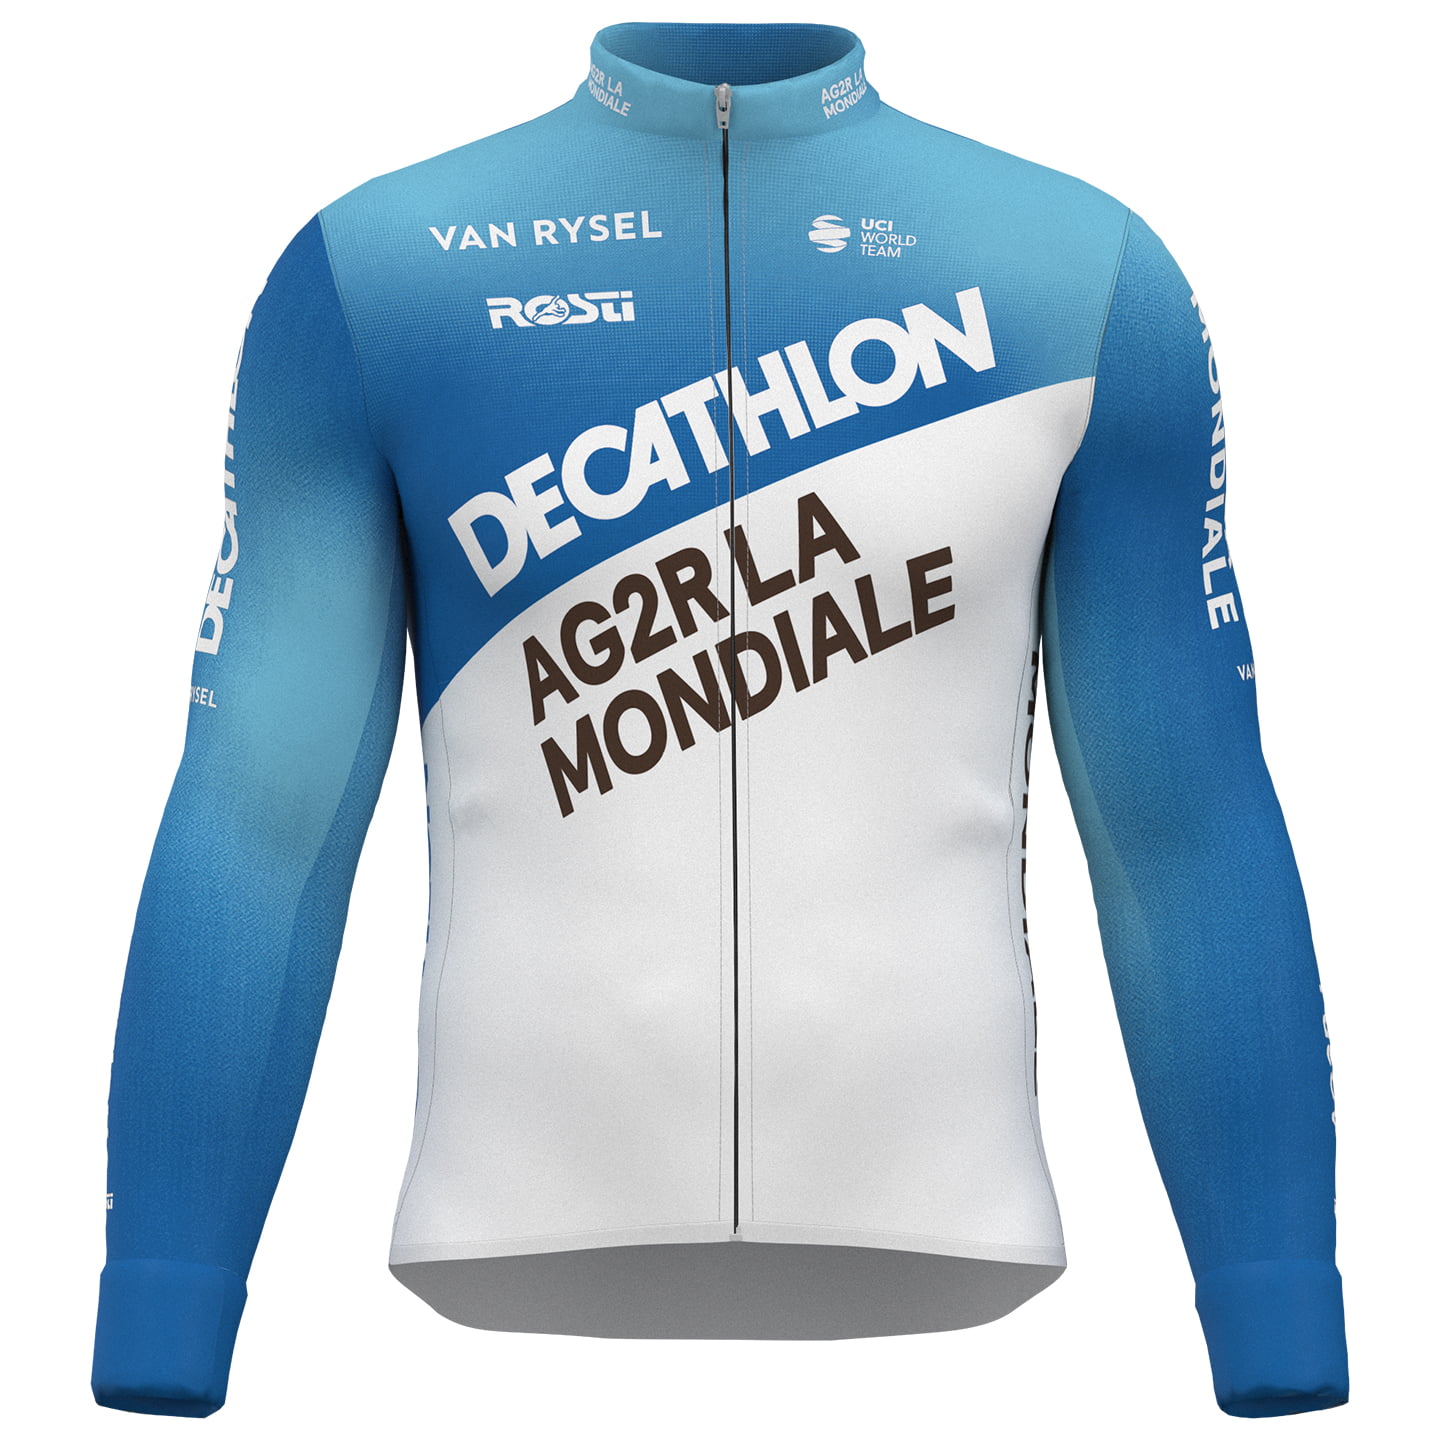 DECATHLON AG2R LA MONDIALE 2024 Long Sleeve Jersey, for men, size L, Cycling shirt, Cycle clothing